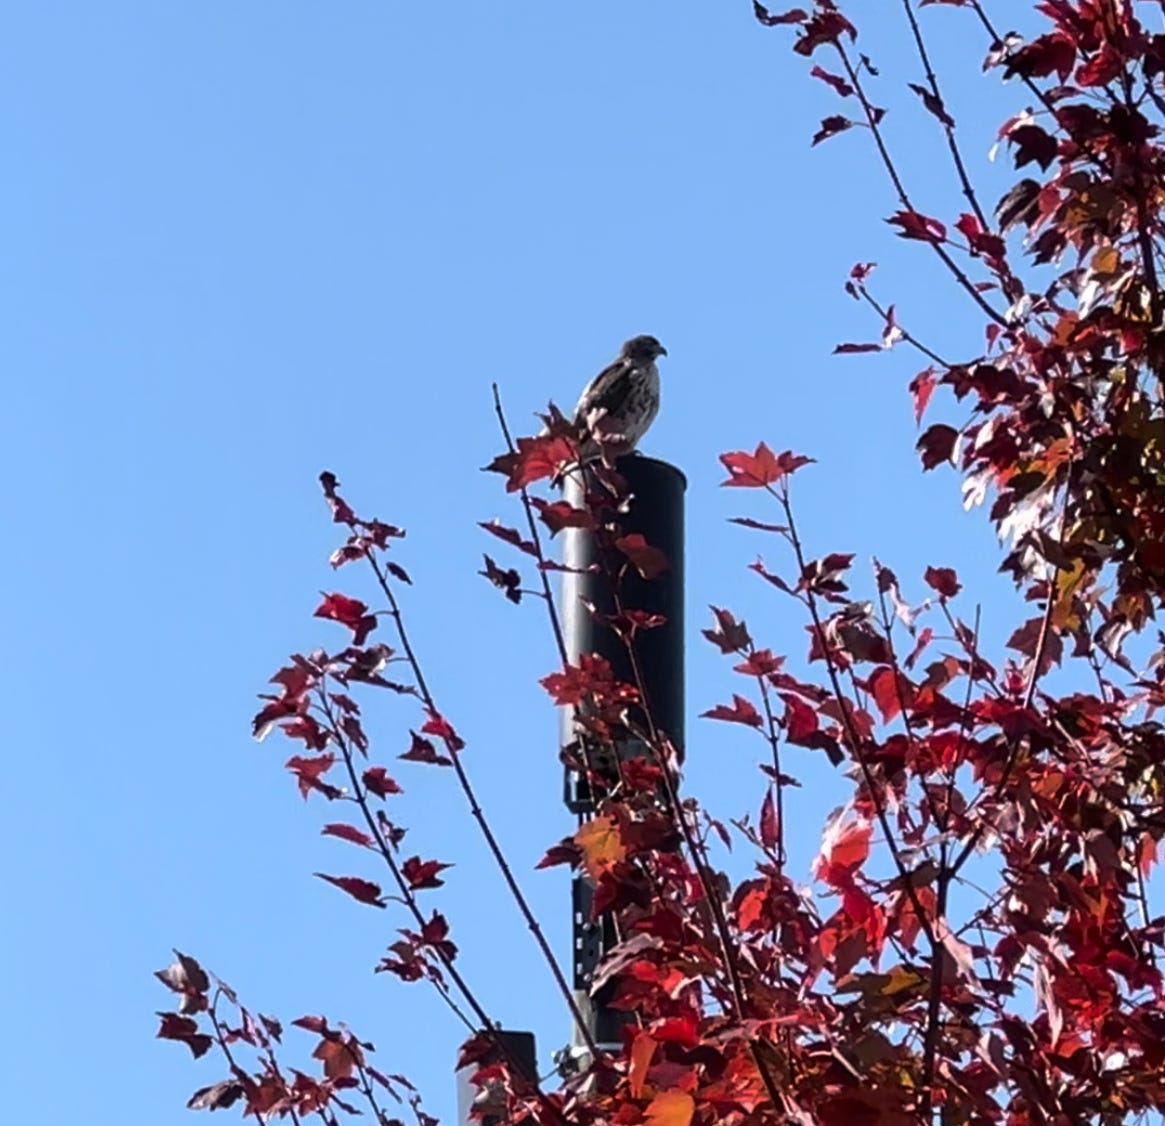 a red-tailed hawk perches upon the top of a powerline pole against a bright blue, cloudless sky and framed beneath by a maple tree with dark red leaves